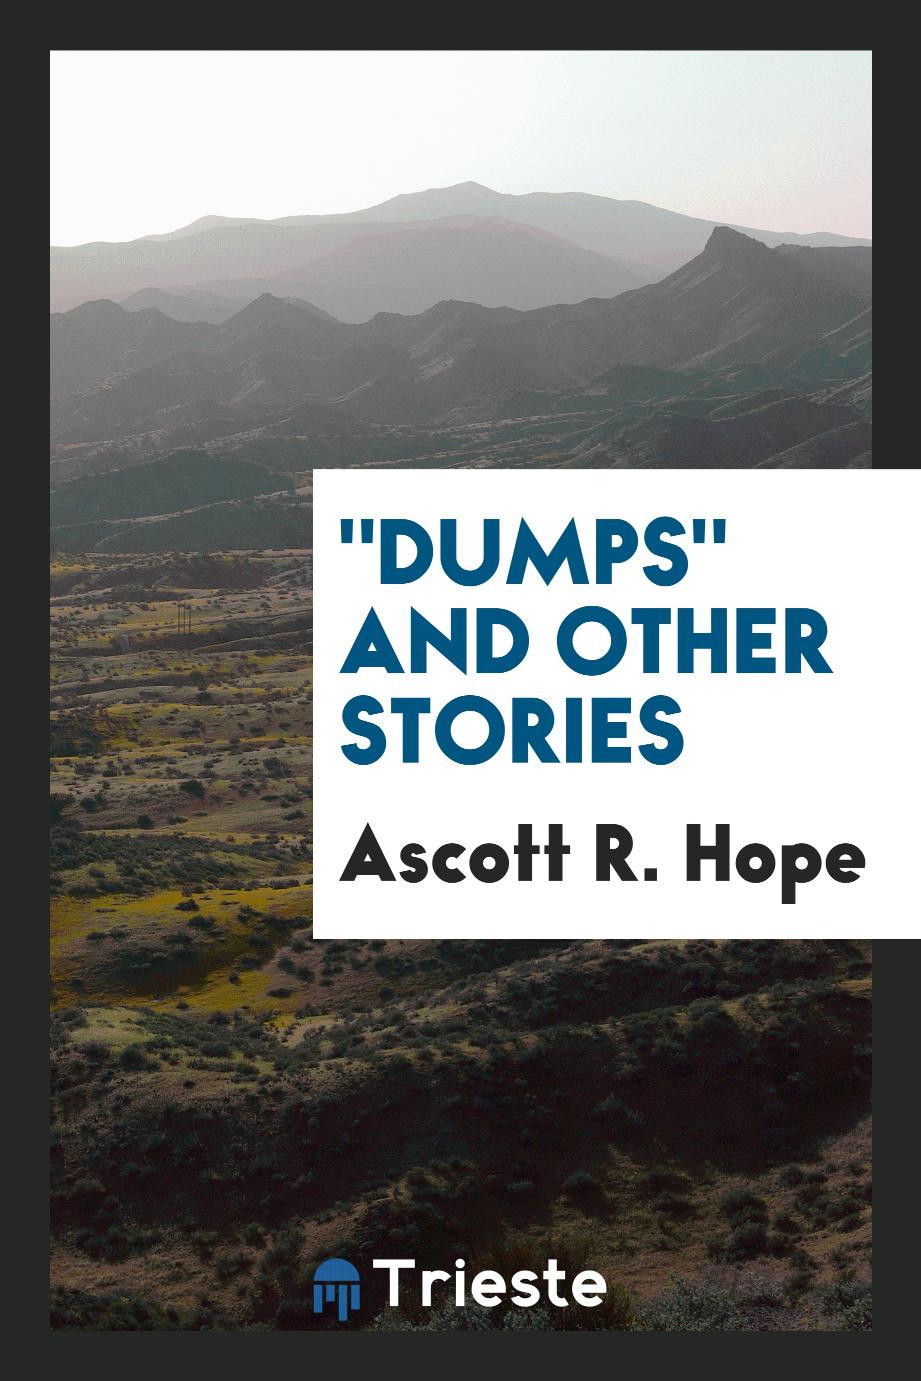 "Dumps" and Other Stories